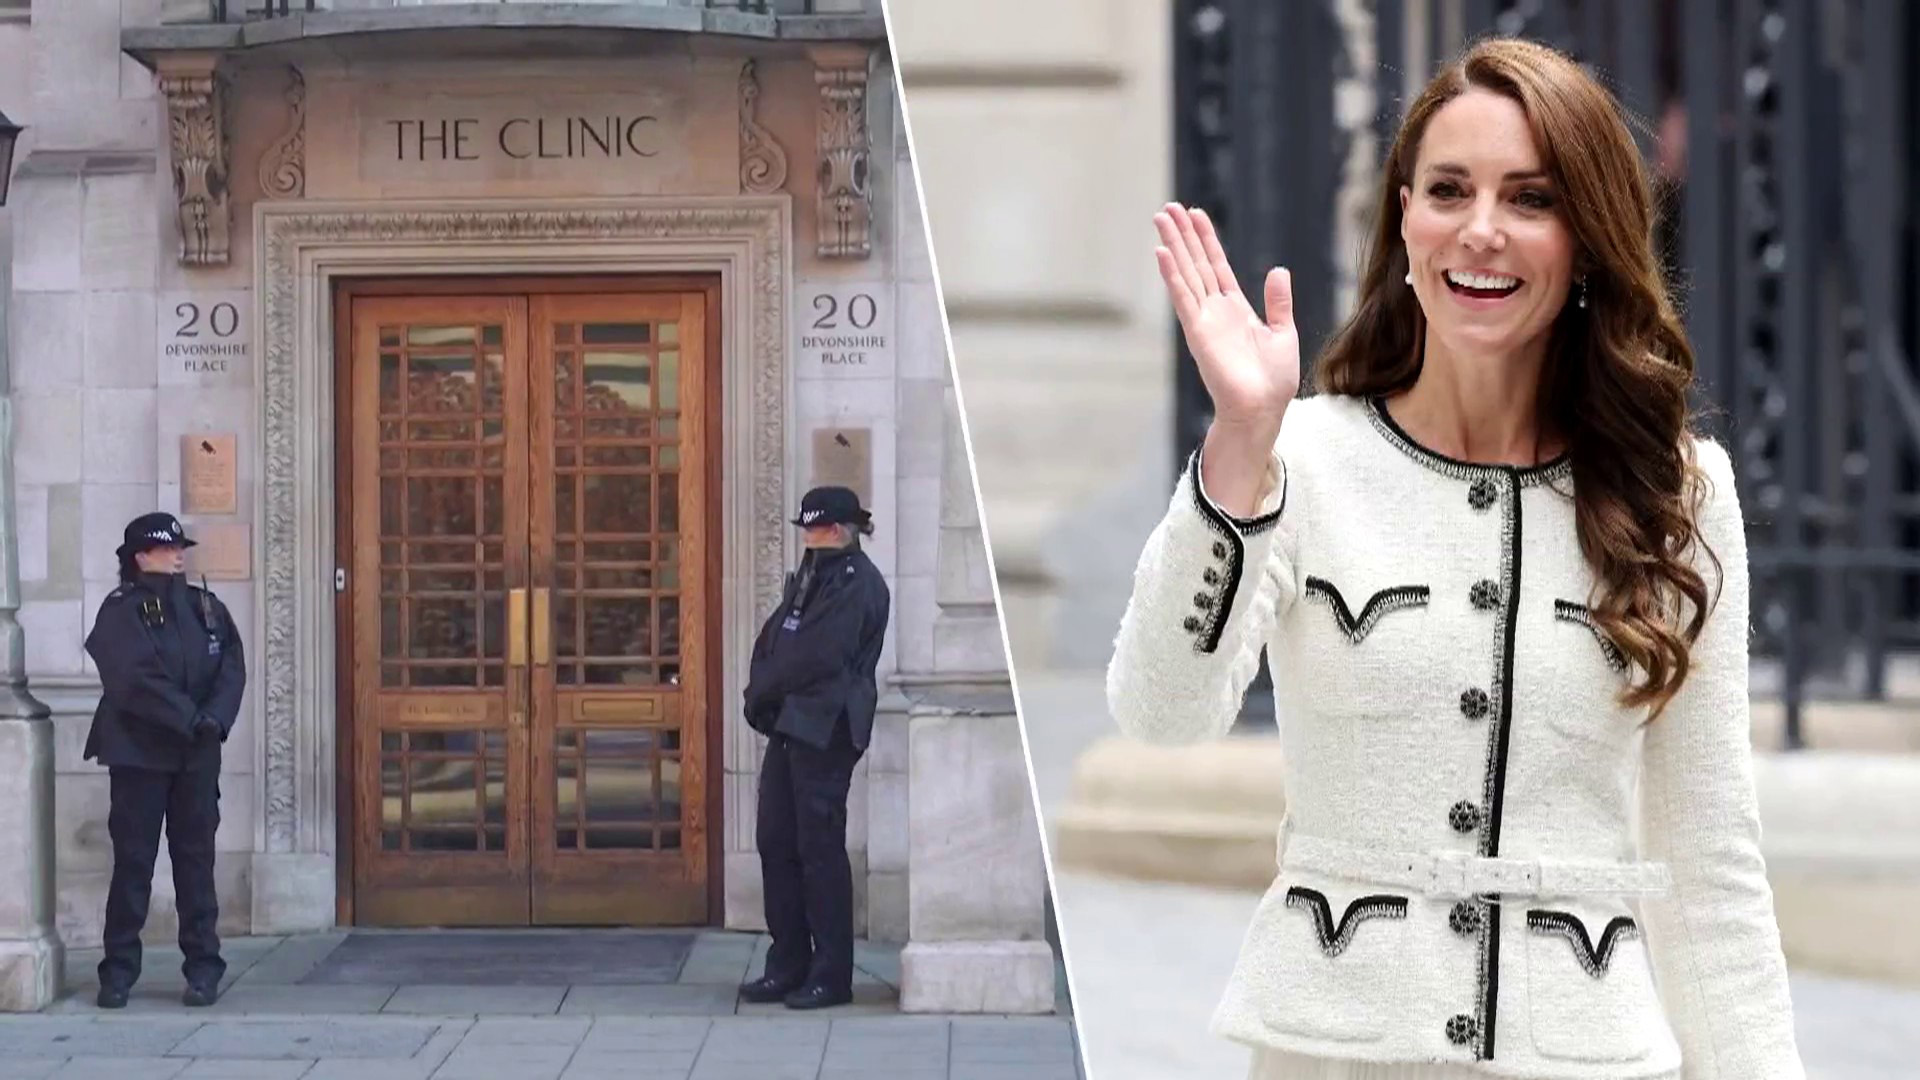 3 clinic staffers could be behind Kate's alleged medical data breach